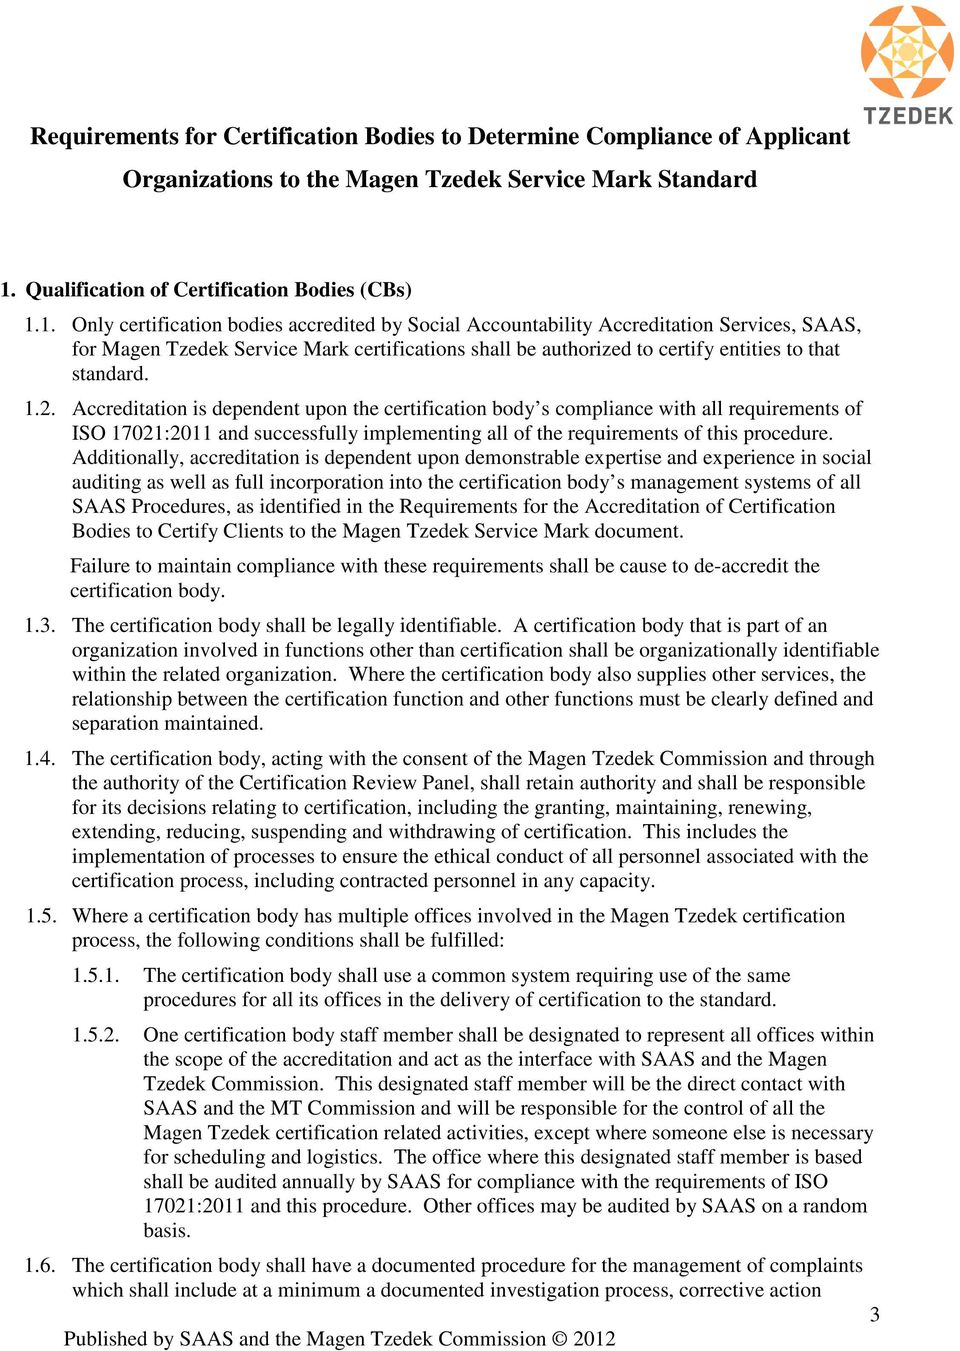 1. Only certification bodies accredited by Social Accountability Accreditation Services, SAAS, for Magen Tzedek Service Mark certifications shall be authorized to certify entities to that standard. 1.